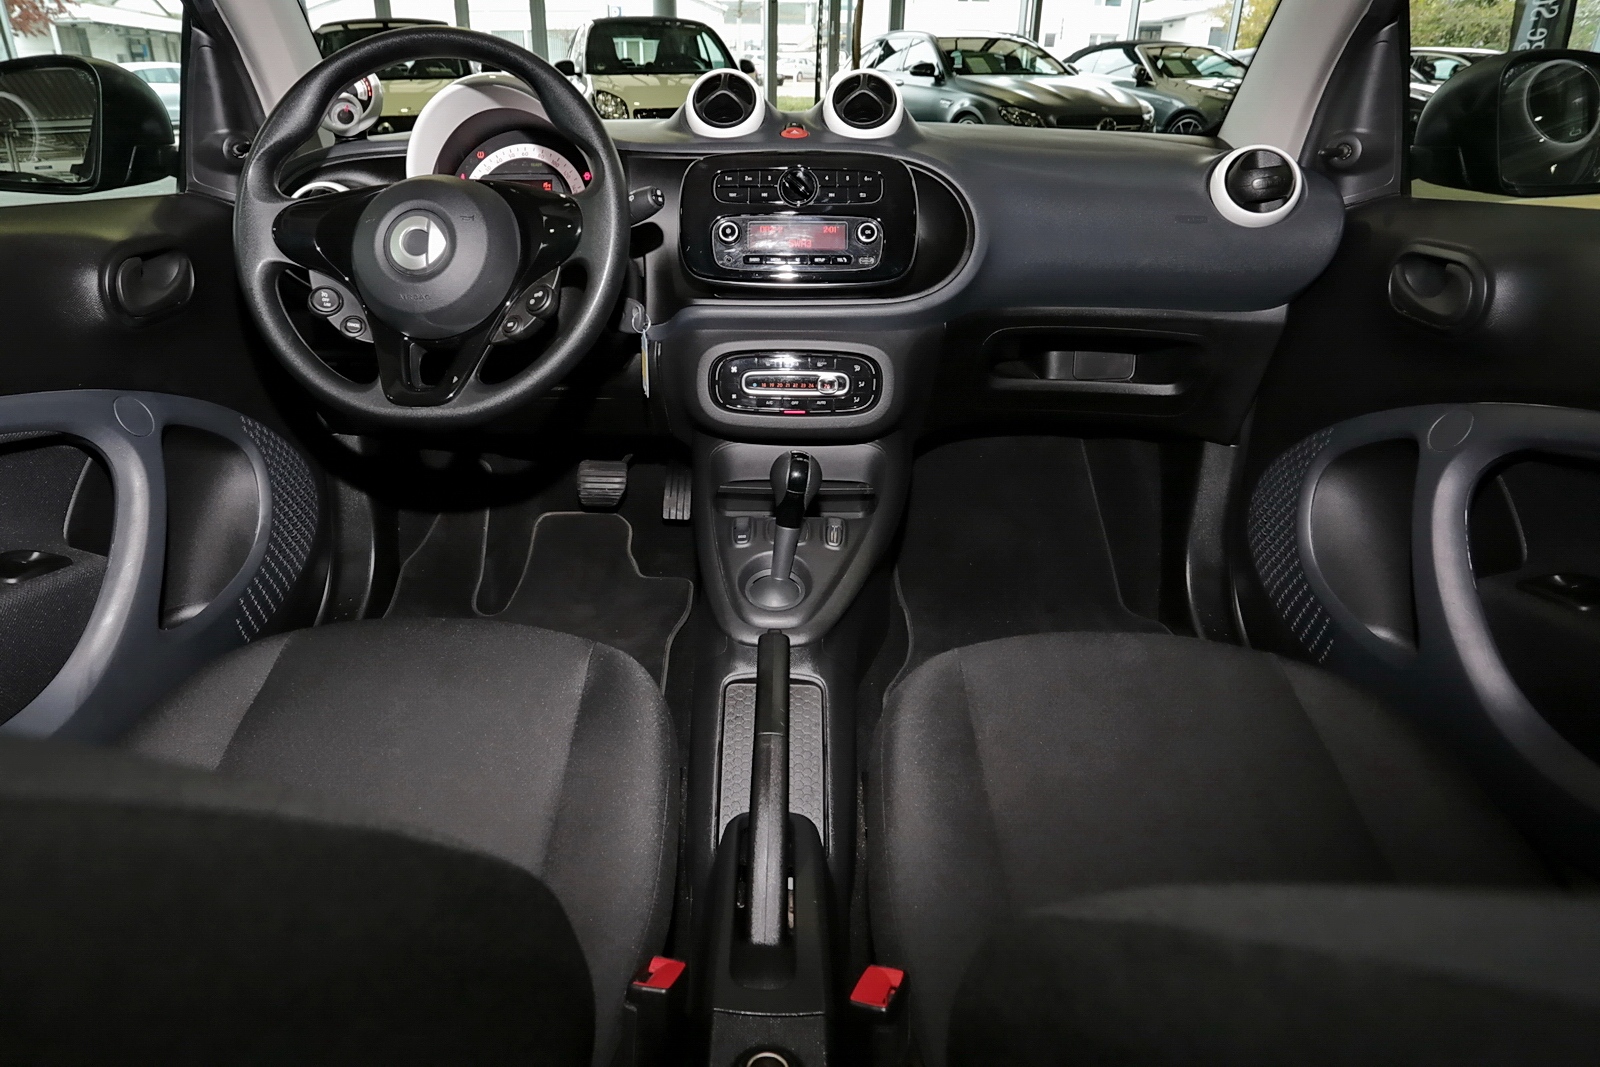 Smart ForTwo EQ Tempomat+Sidebags+Sitzhzg+Cool+Audiopk 